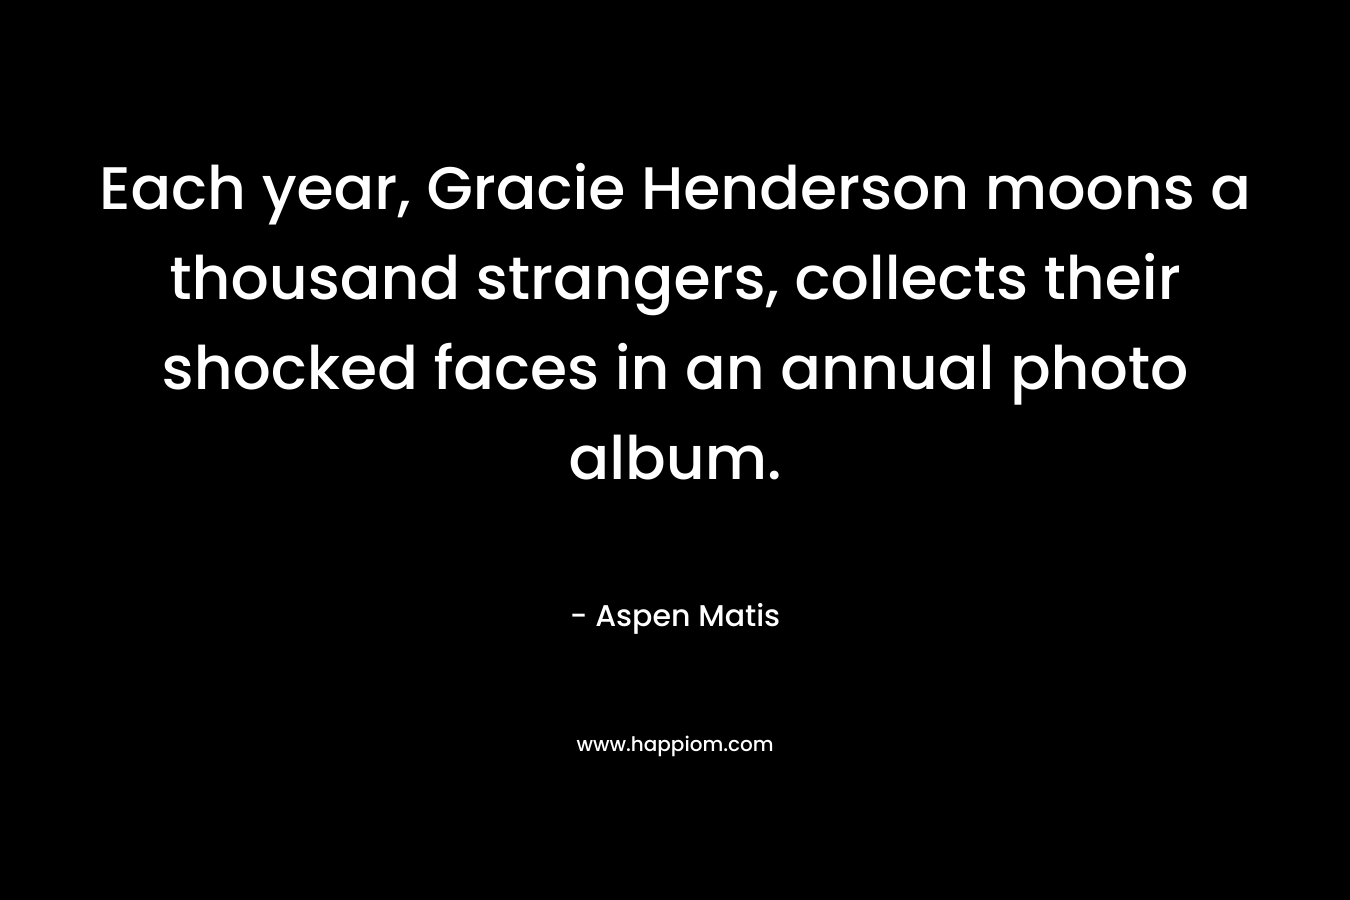 Each year, Gracie Henderson moons a thousand strangers, collects their shocked faces in an annual photo album. – Aspen Matis